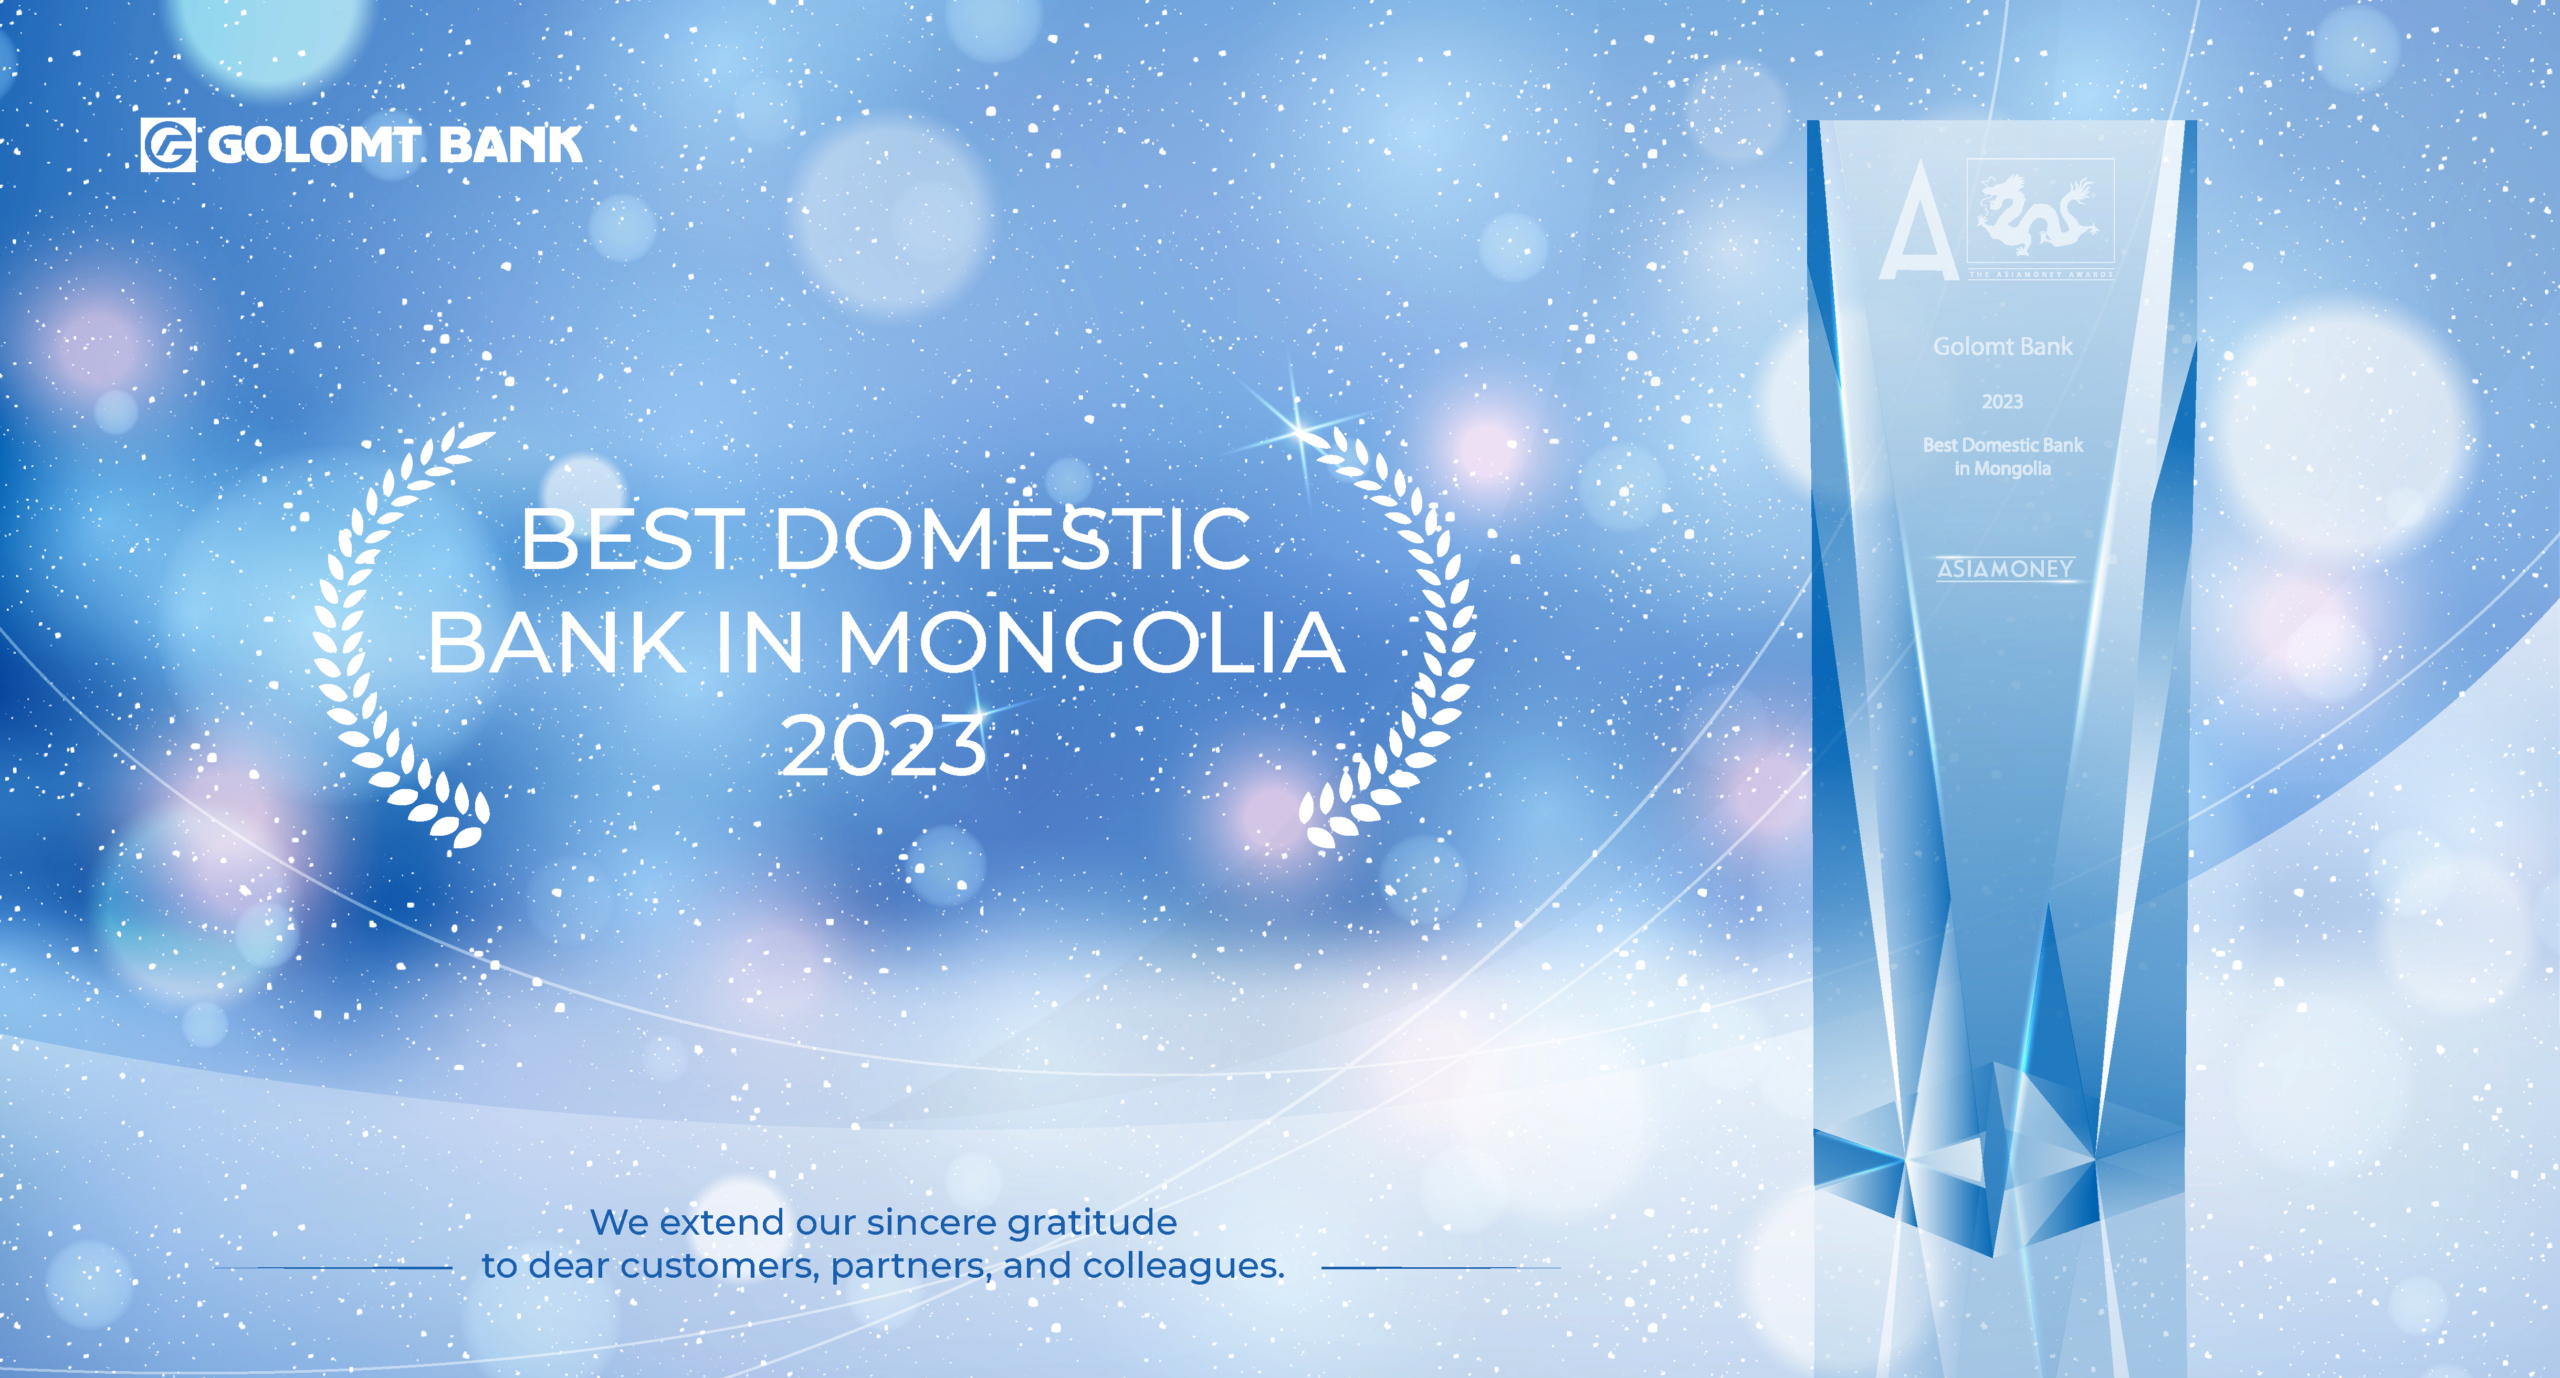 GOLOMT BANK NAMED AS THE “BEST DOMESTIC BANK IN MONGOLIA 2023&quot;